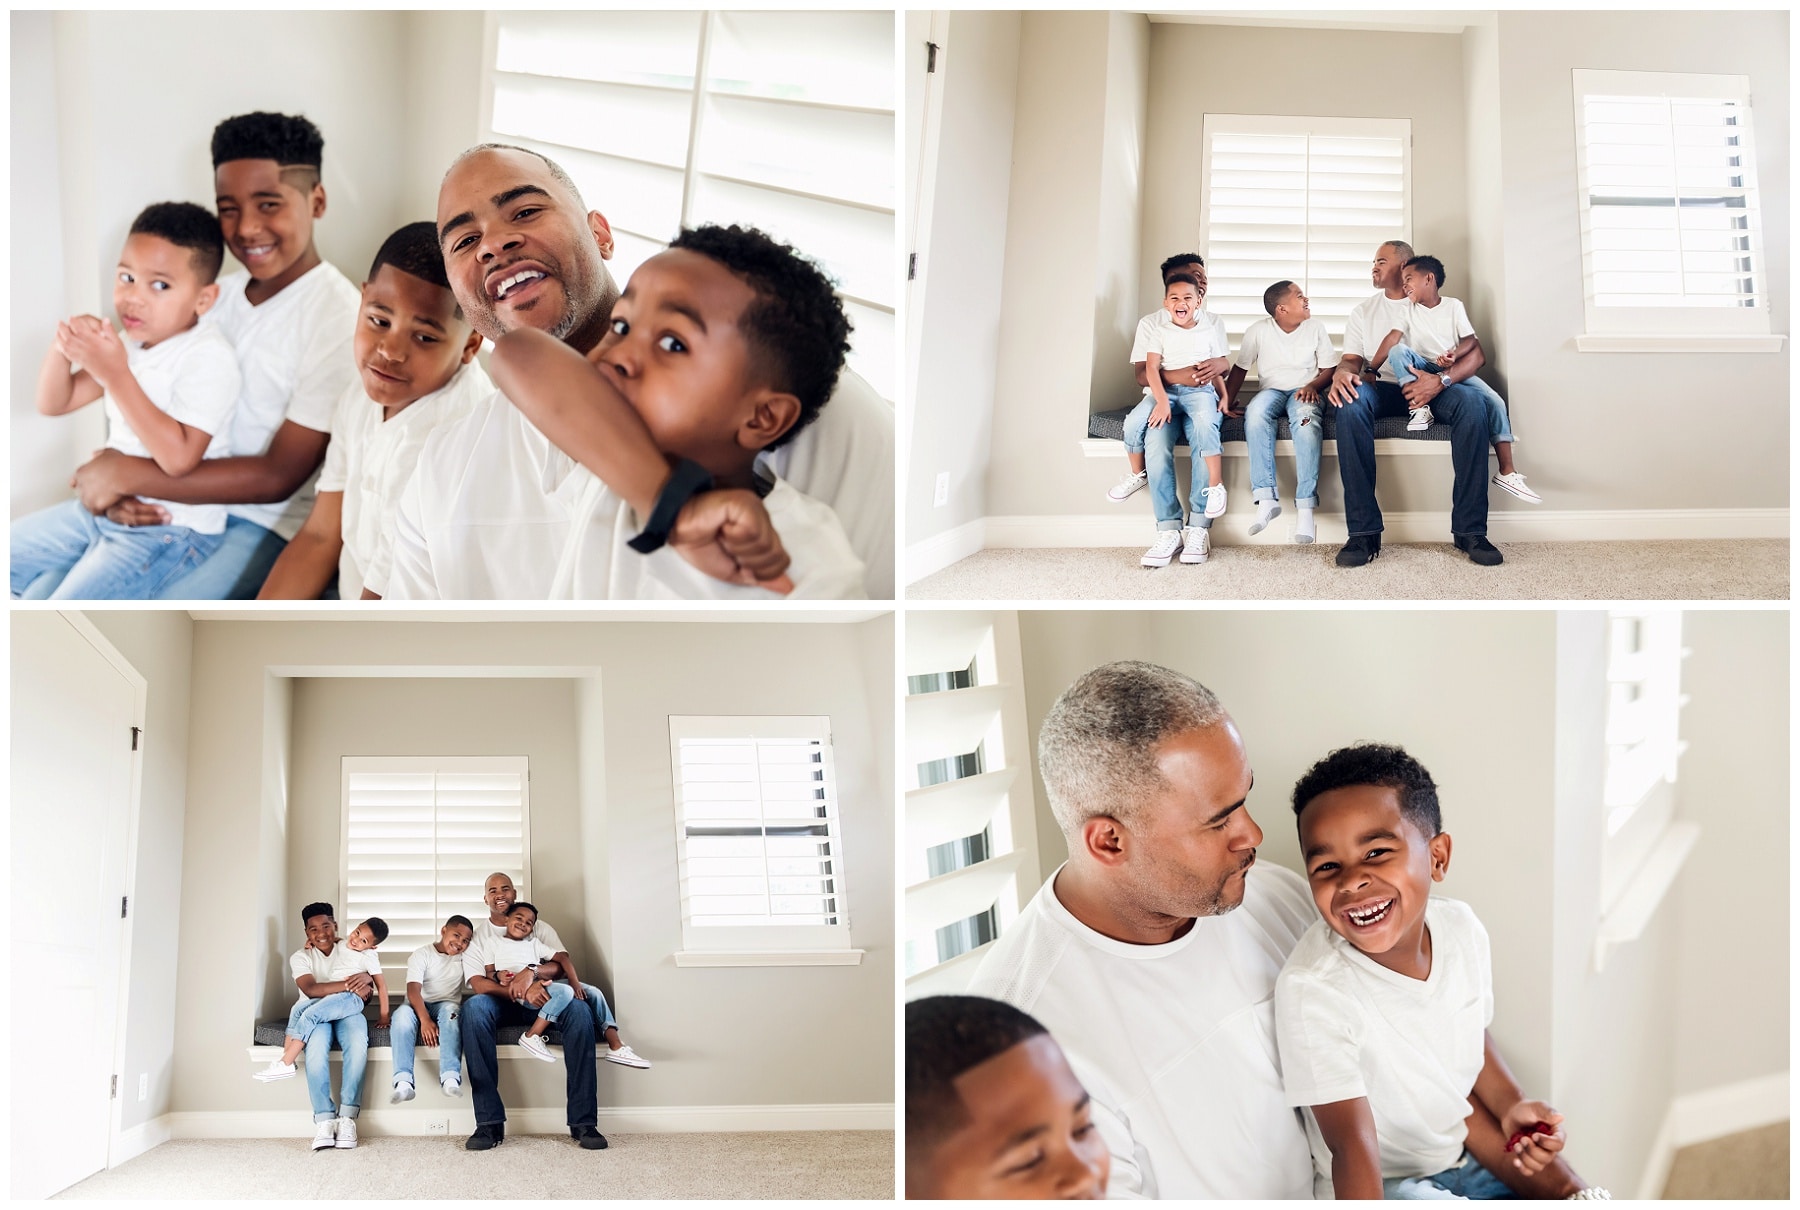 Family Photographer in Jacksonville | 8.08 Photography | www.808photographyjax.com